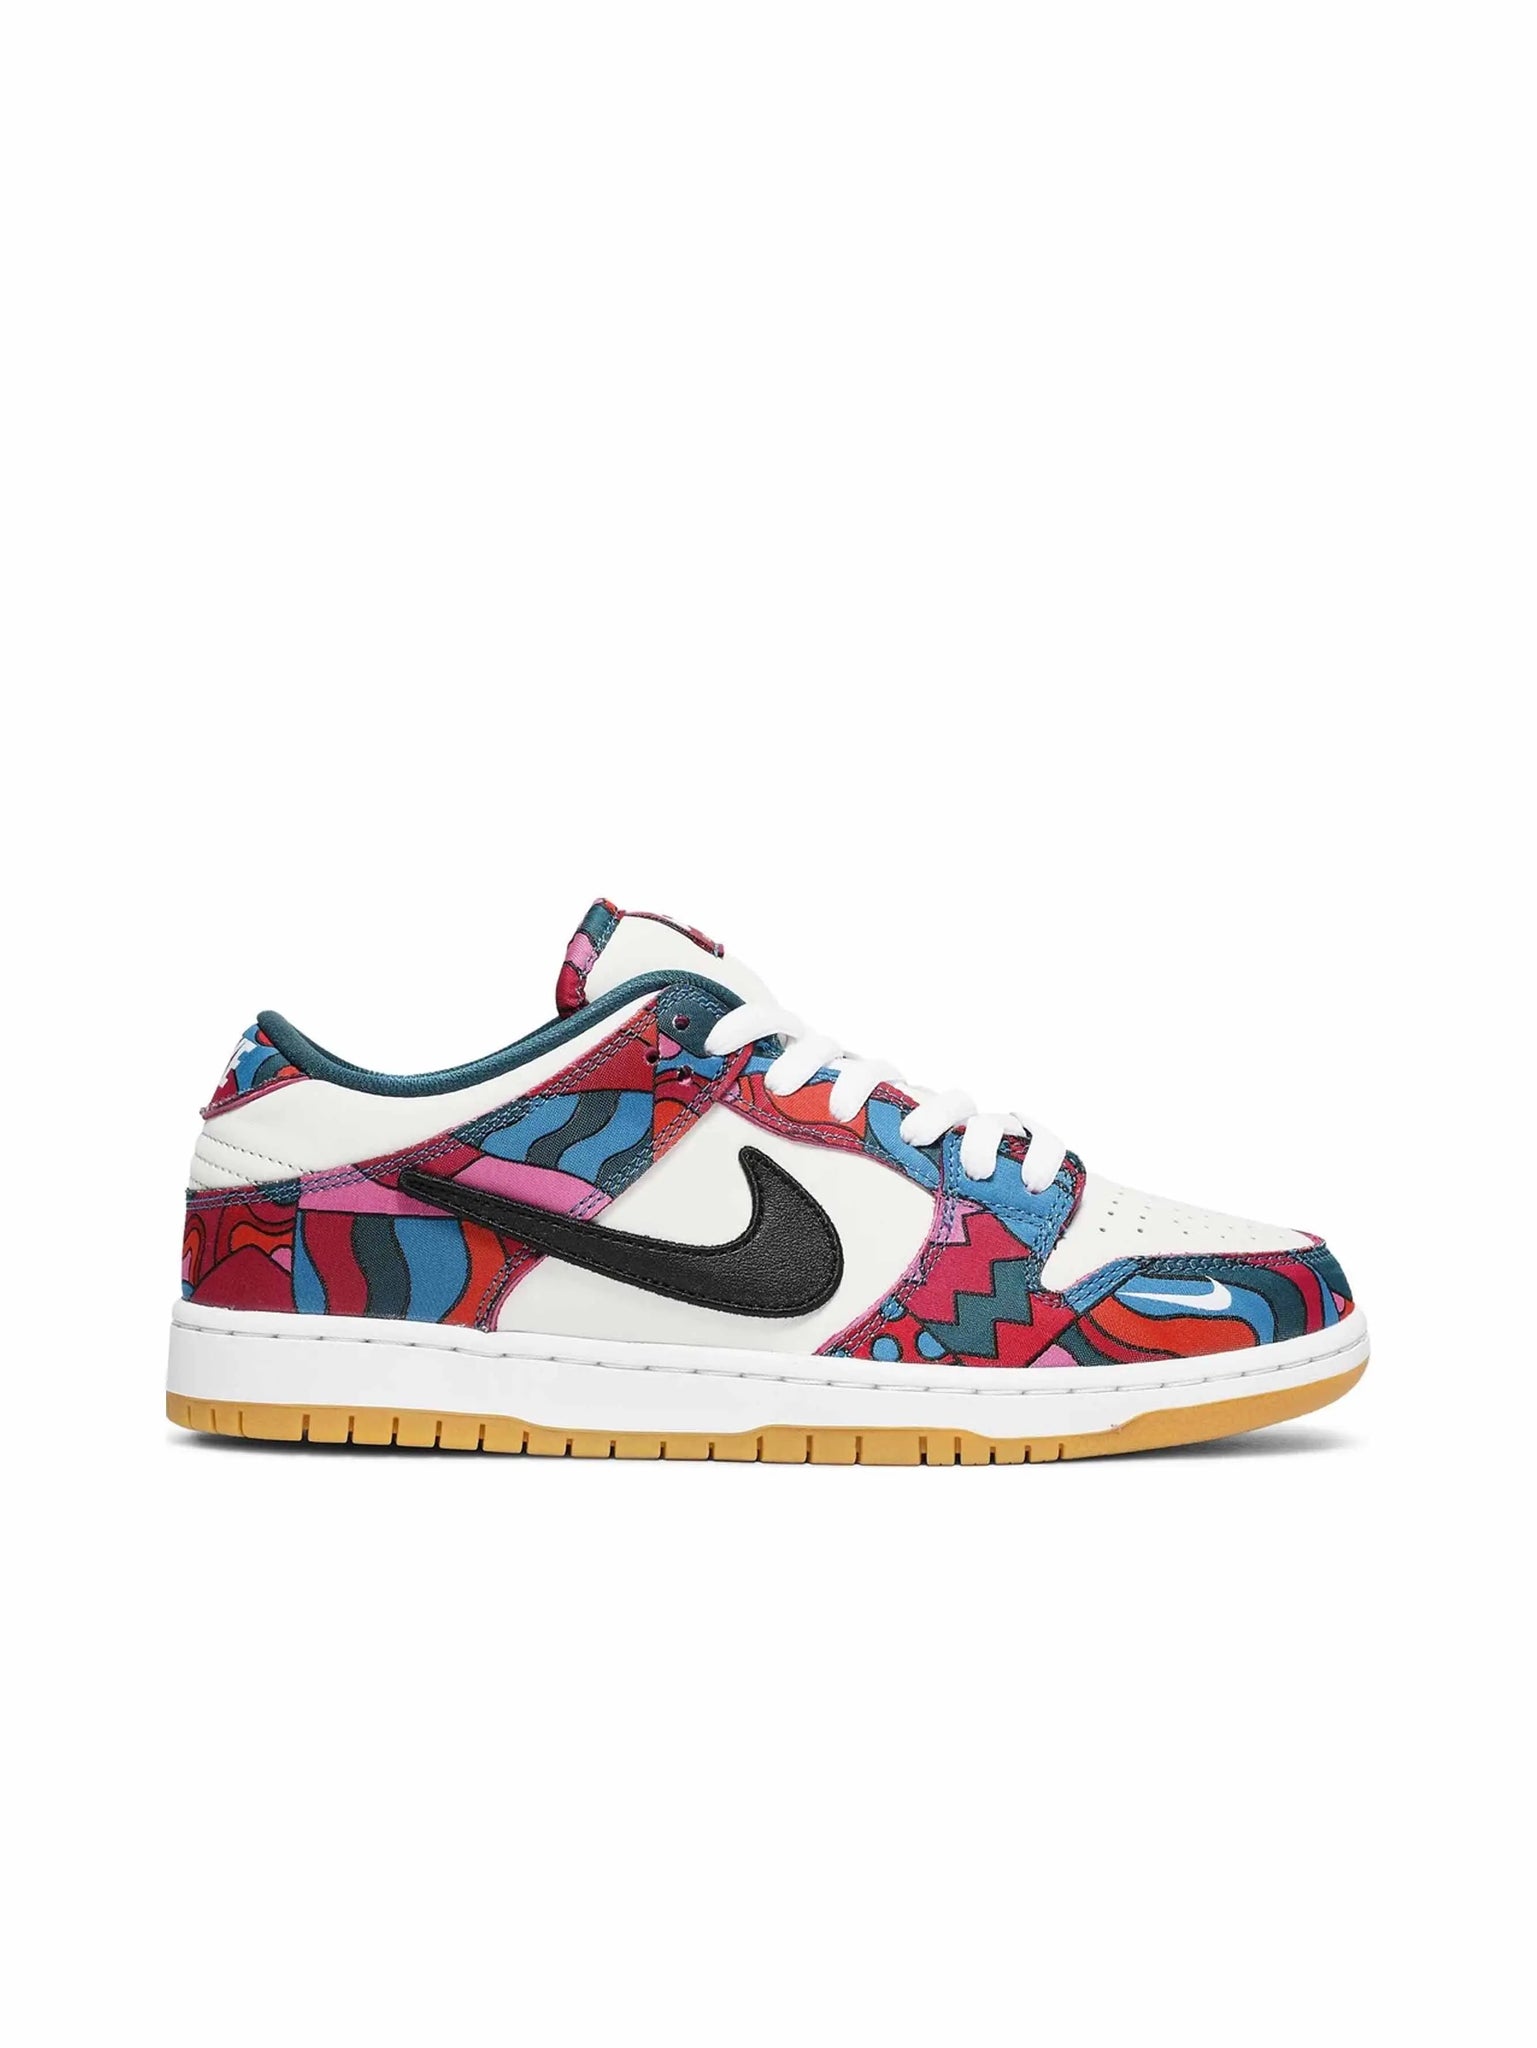 Nike SB Dunk Low Pro Parra Abstract Art (2021) in Auckland, New Zealand - Shop name